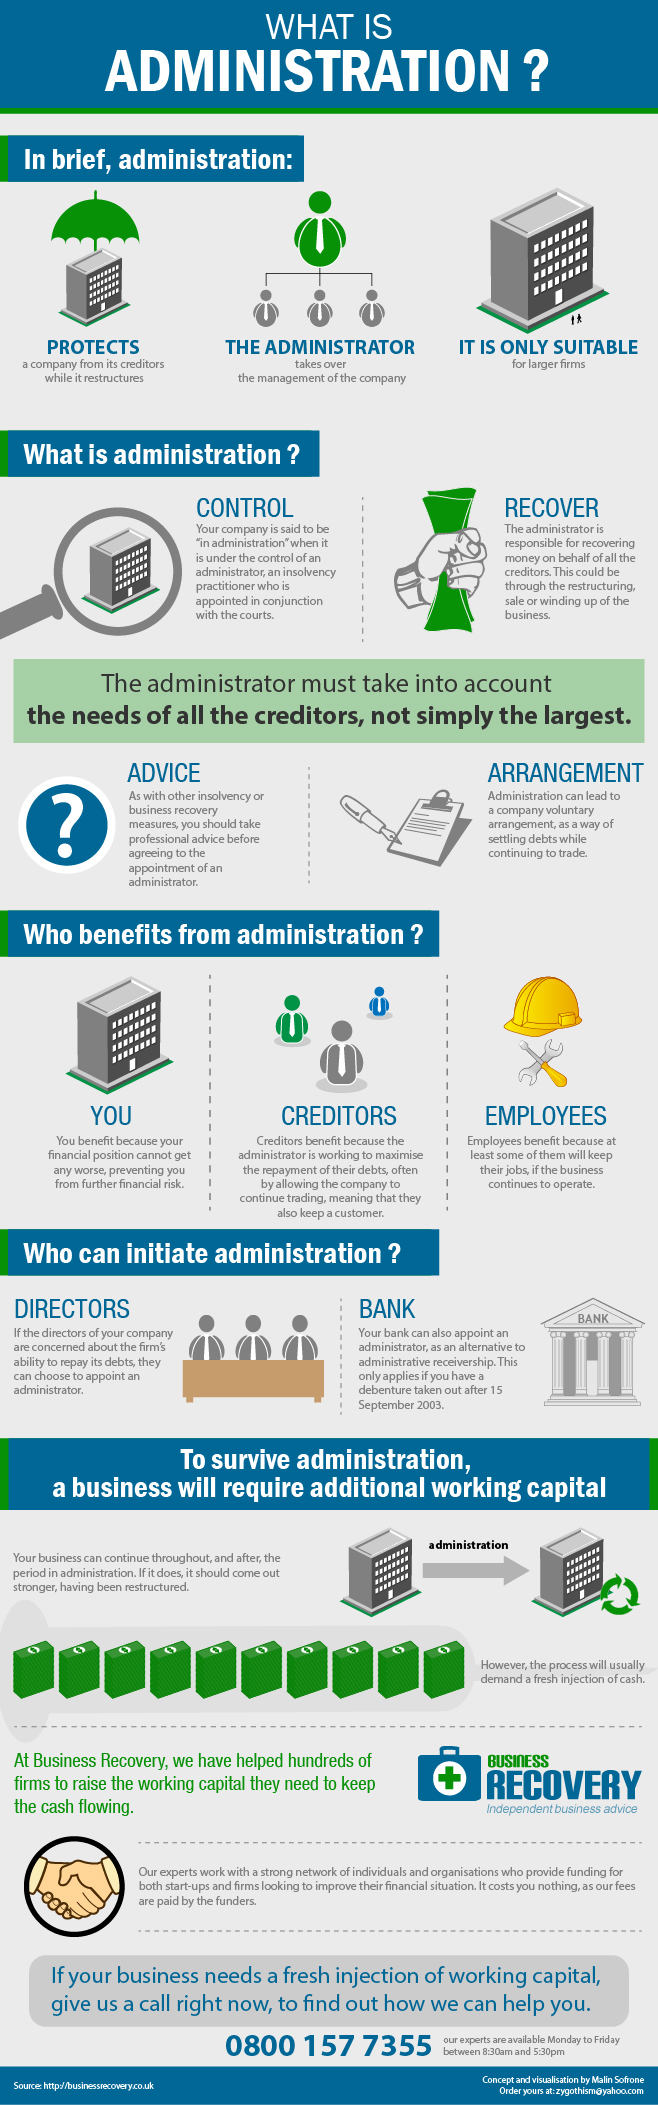 A new take on understanding how Administration works